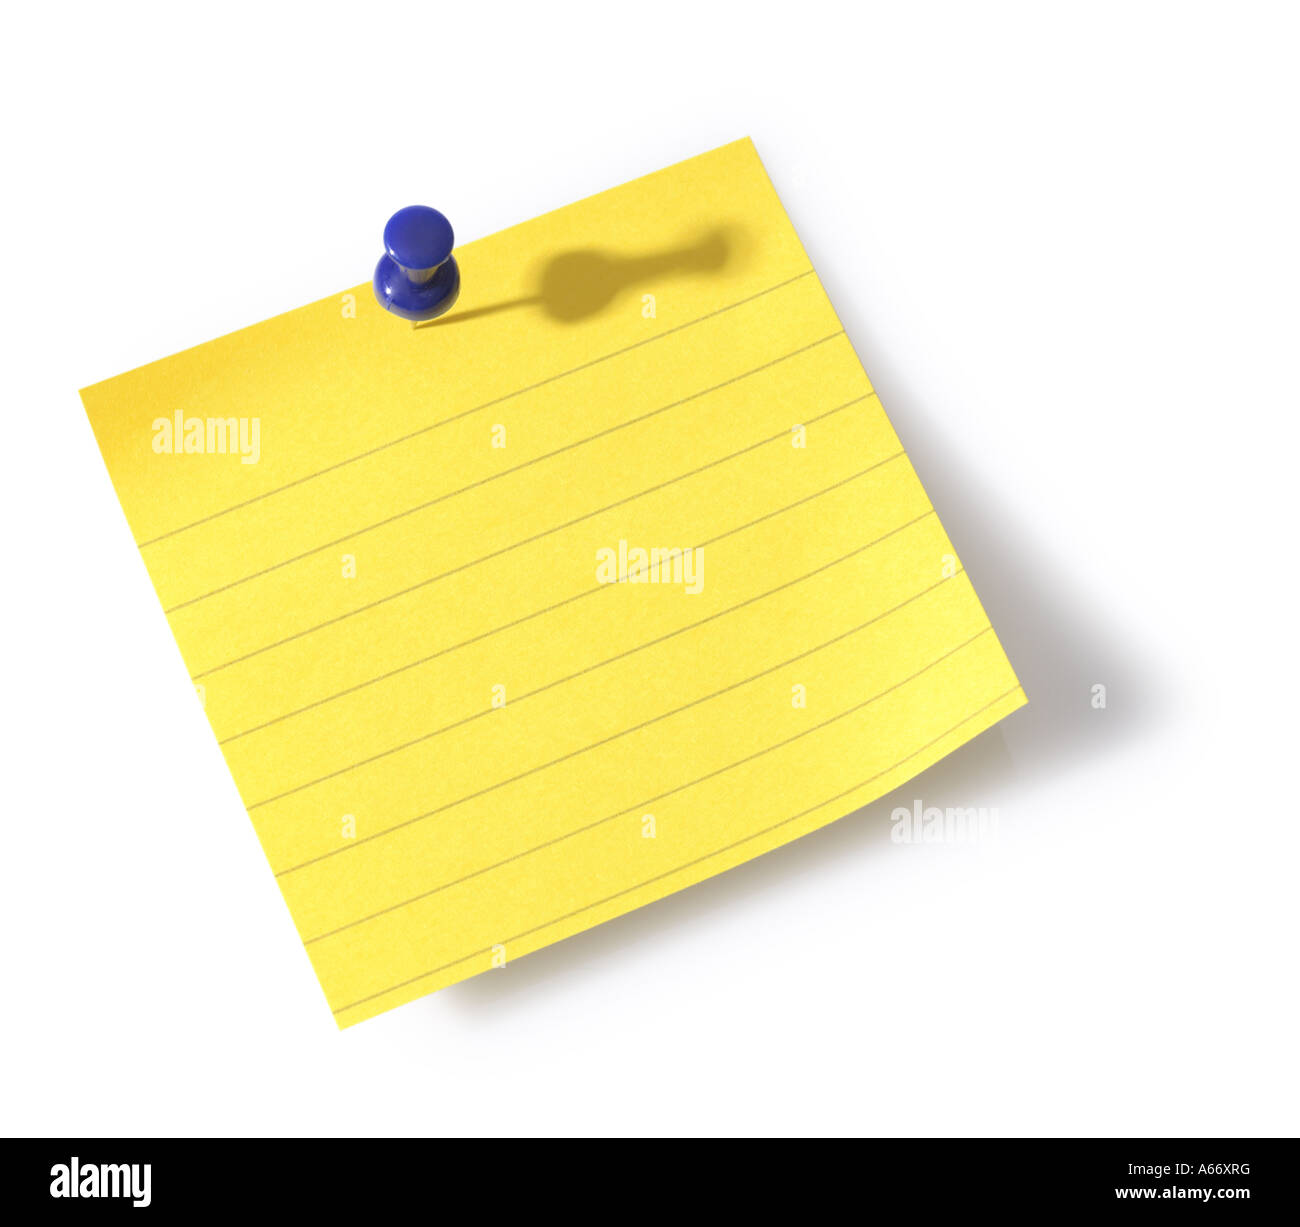 Scrap paper with tacks cut out on white background Stock Photo - Alamy